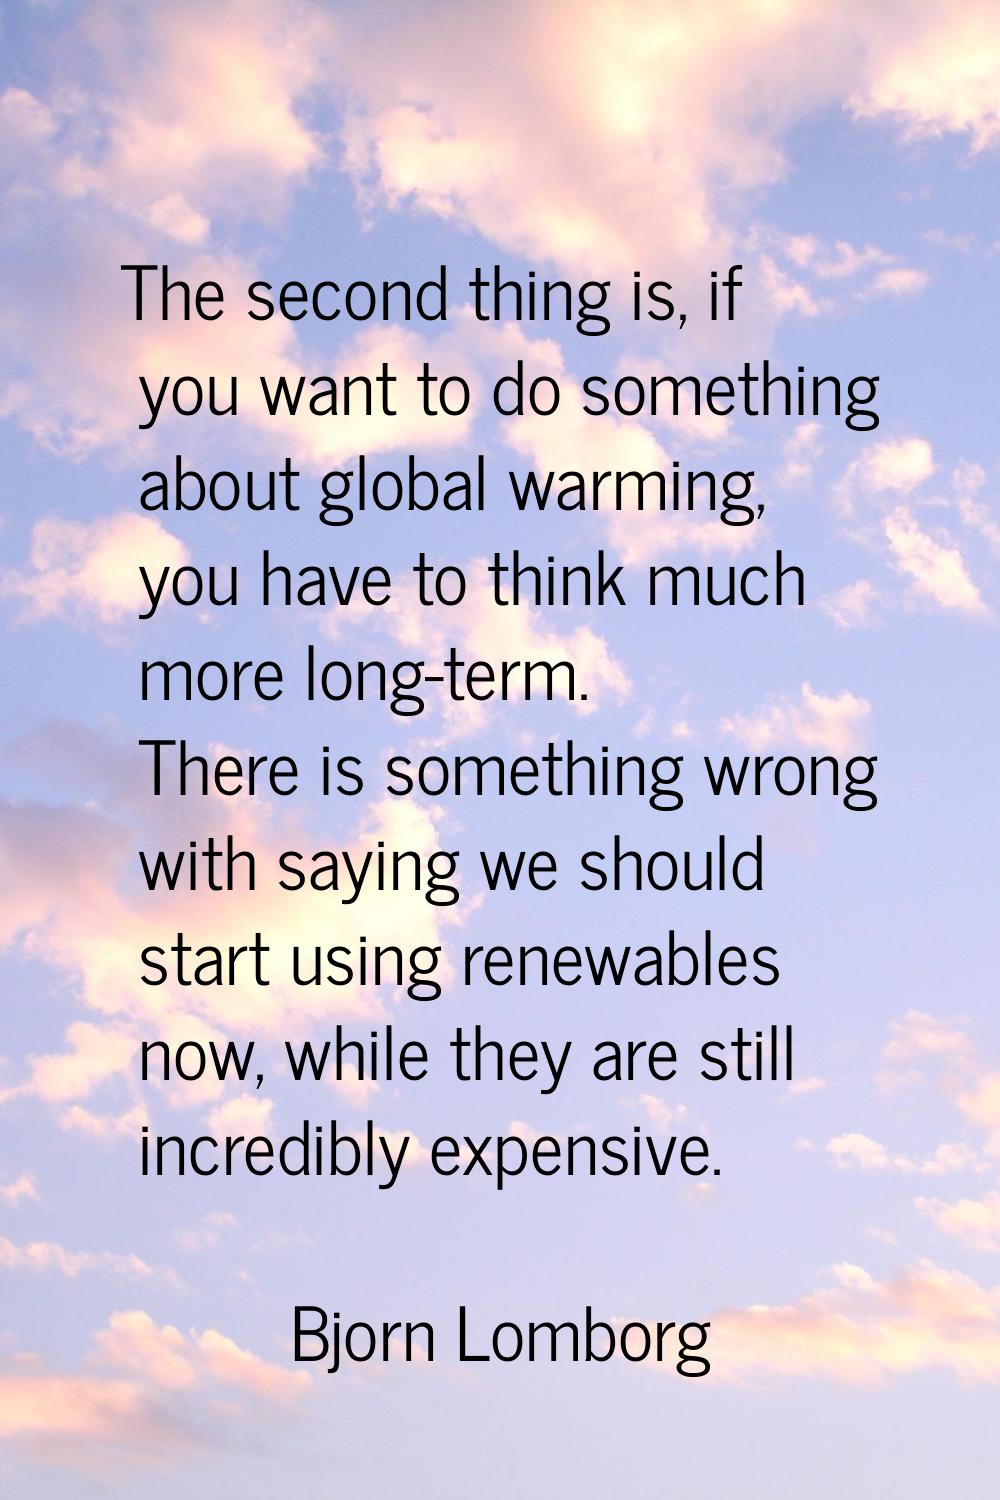 The second thing is, if you want to do something about global warming, you have to think much more 